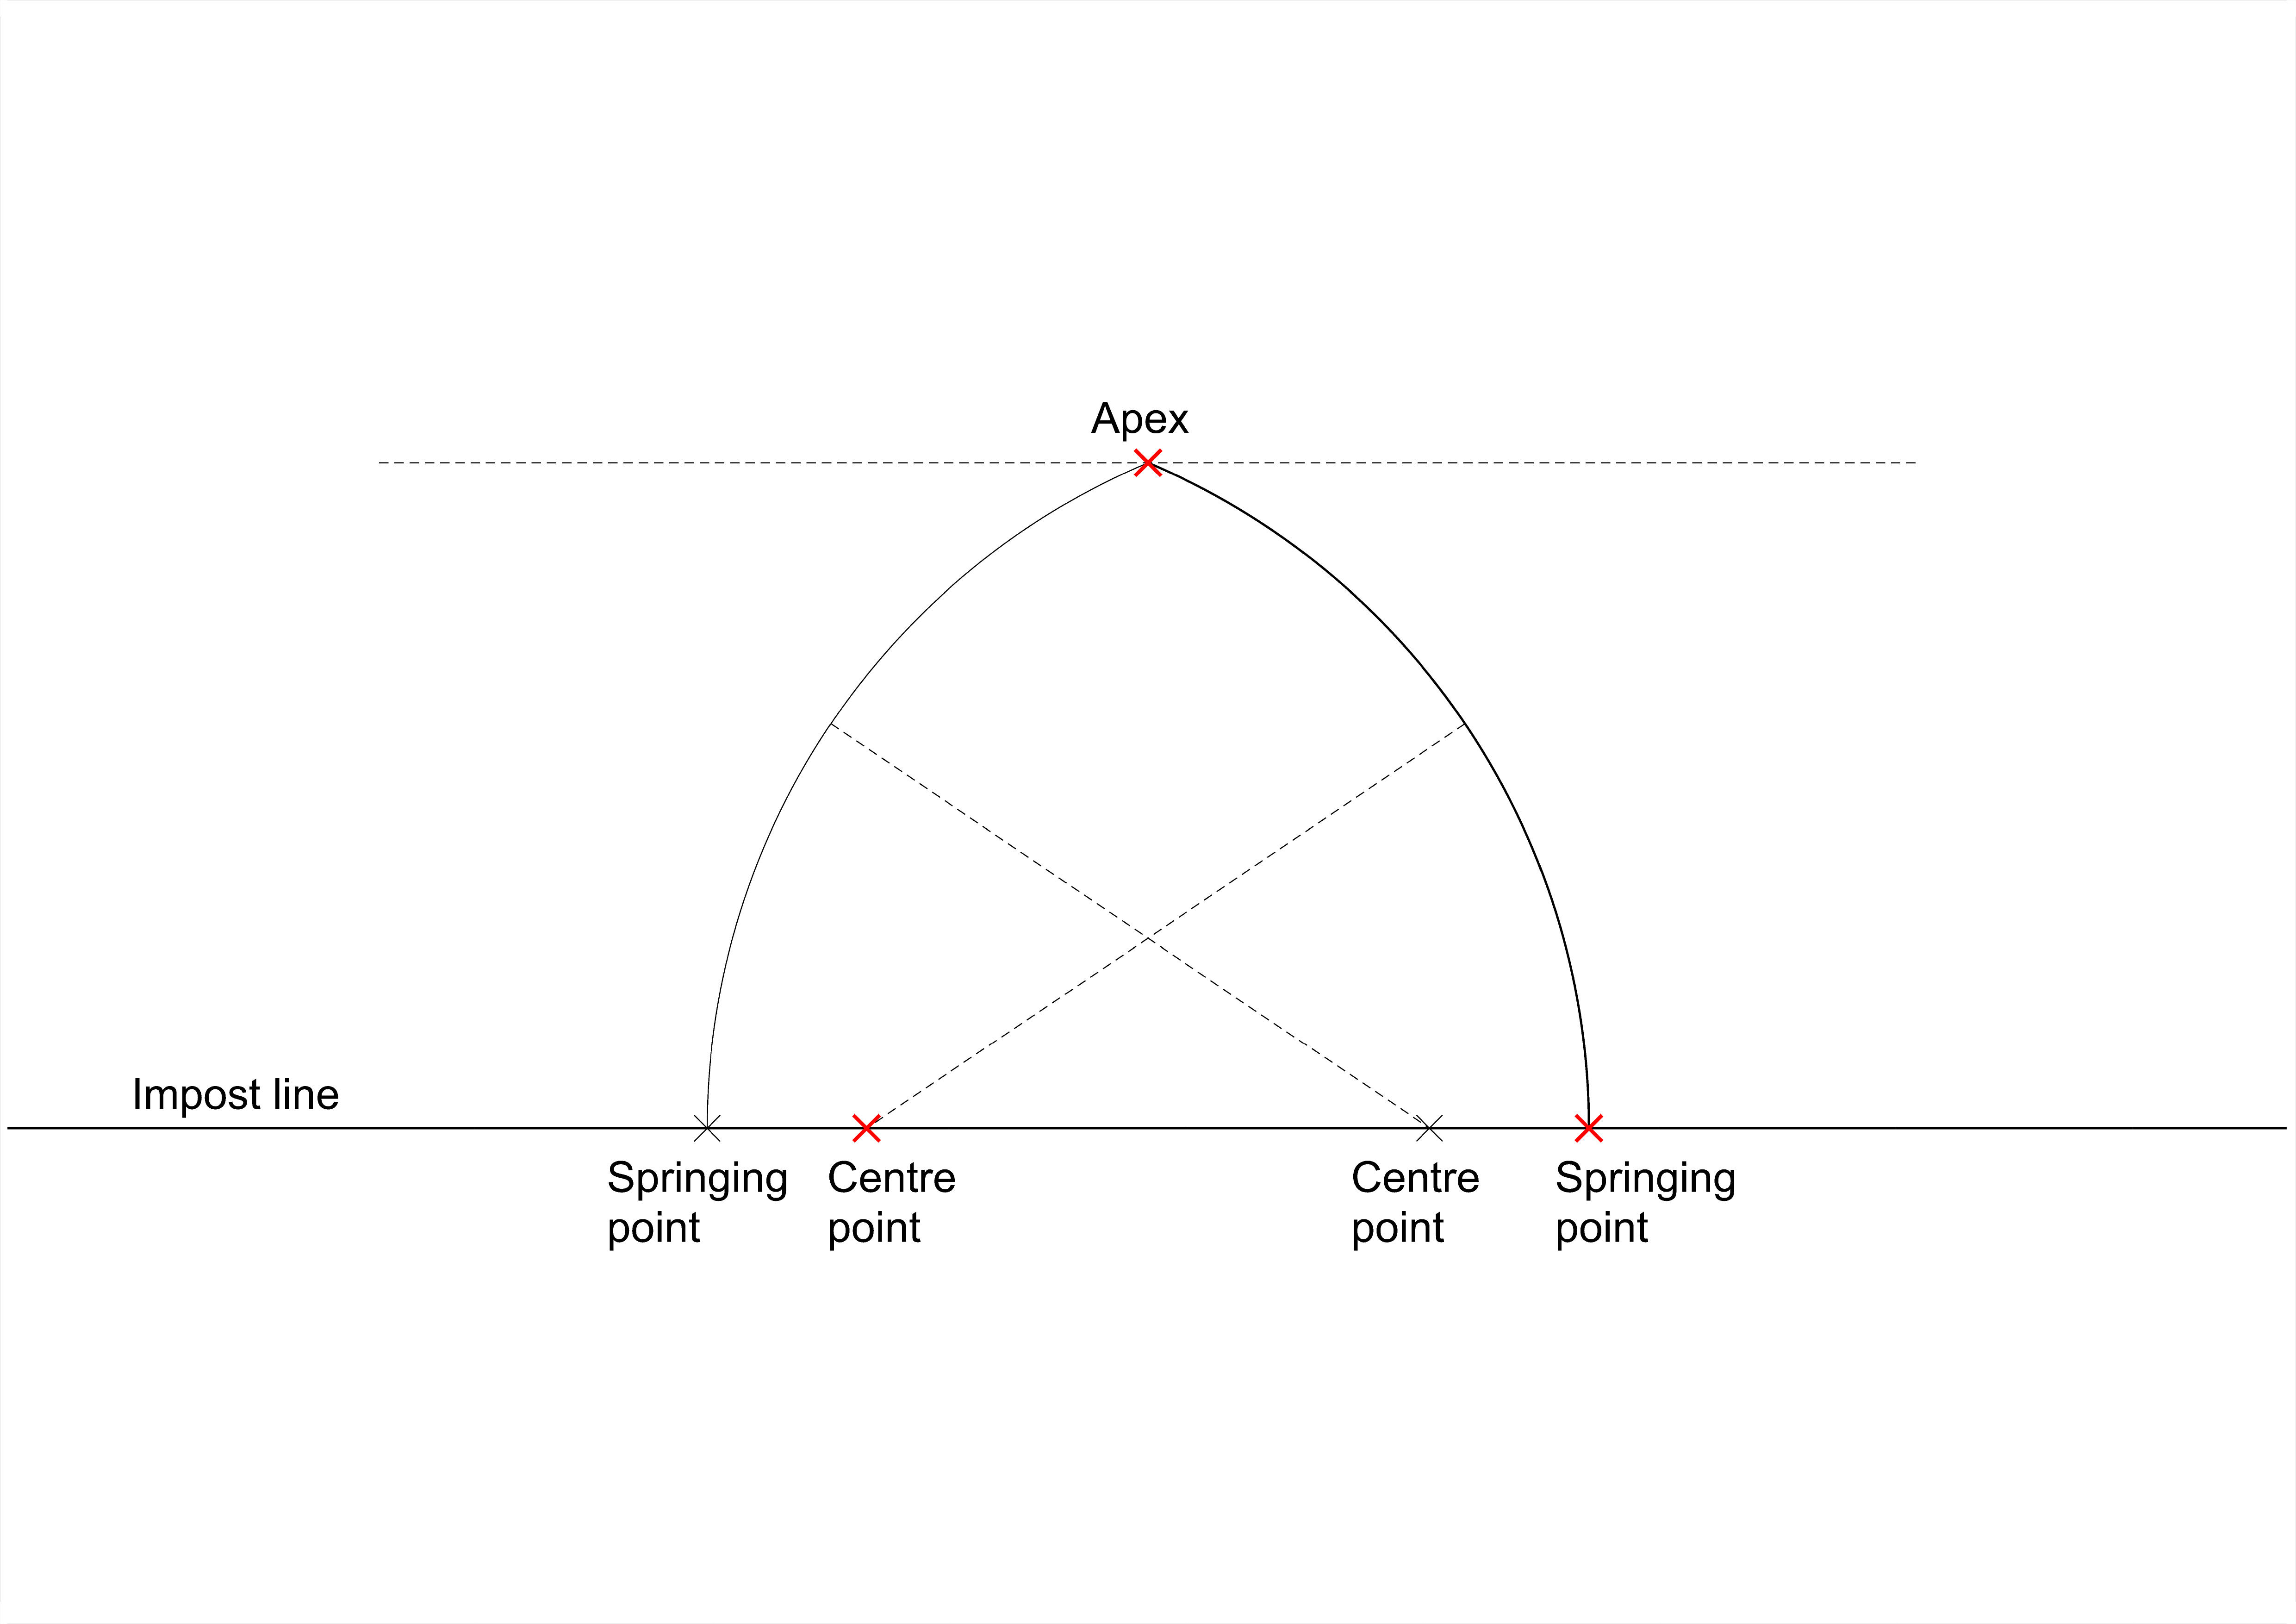 Two-centred arch based on fixed springing point, apex, and centre on the impost